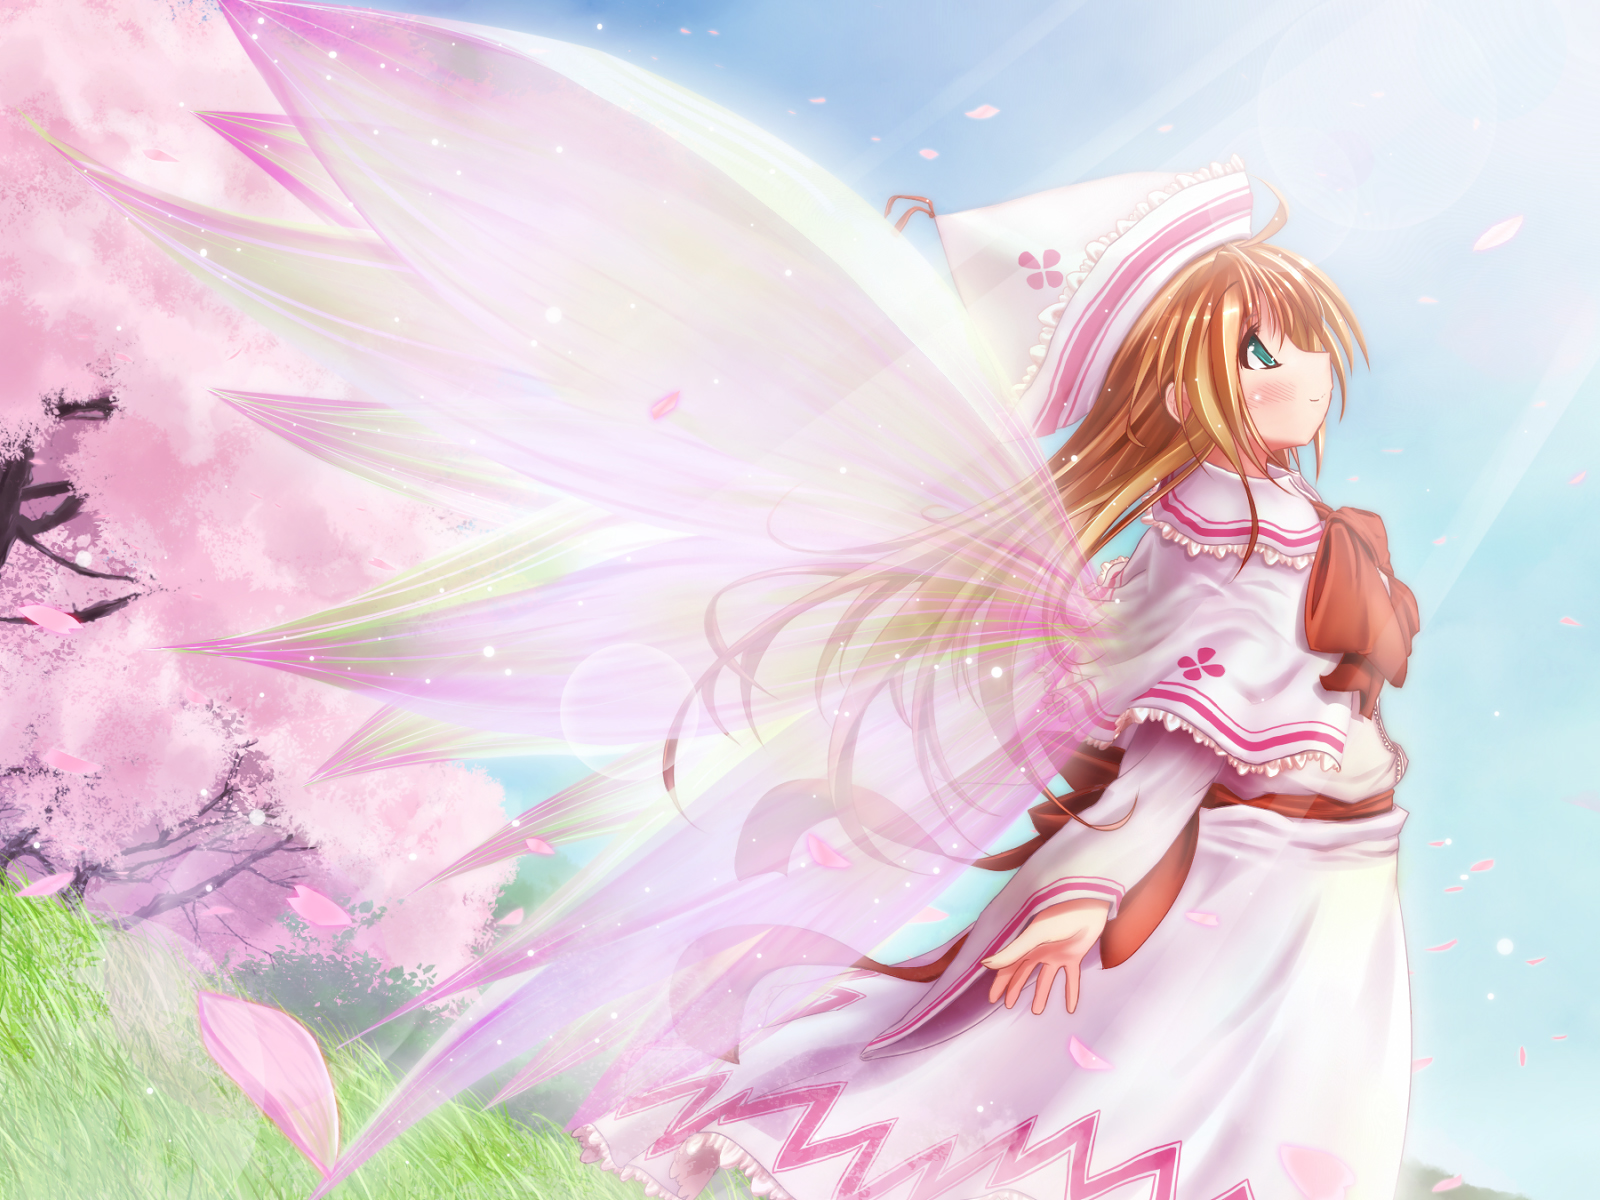 Cute Anime Girl Fairy 1890298 Hd Wallpaper Backgrounds Download